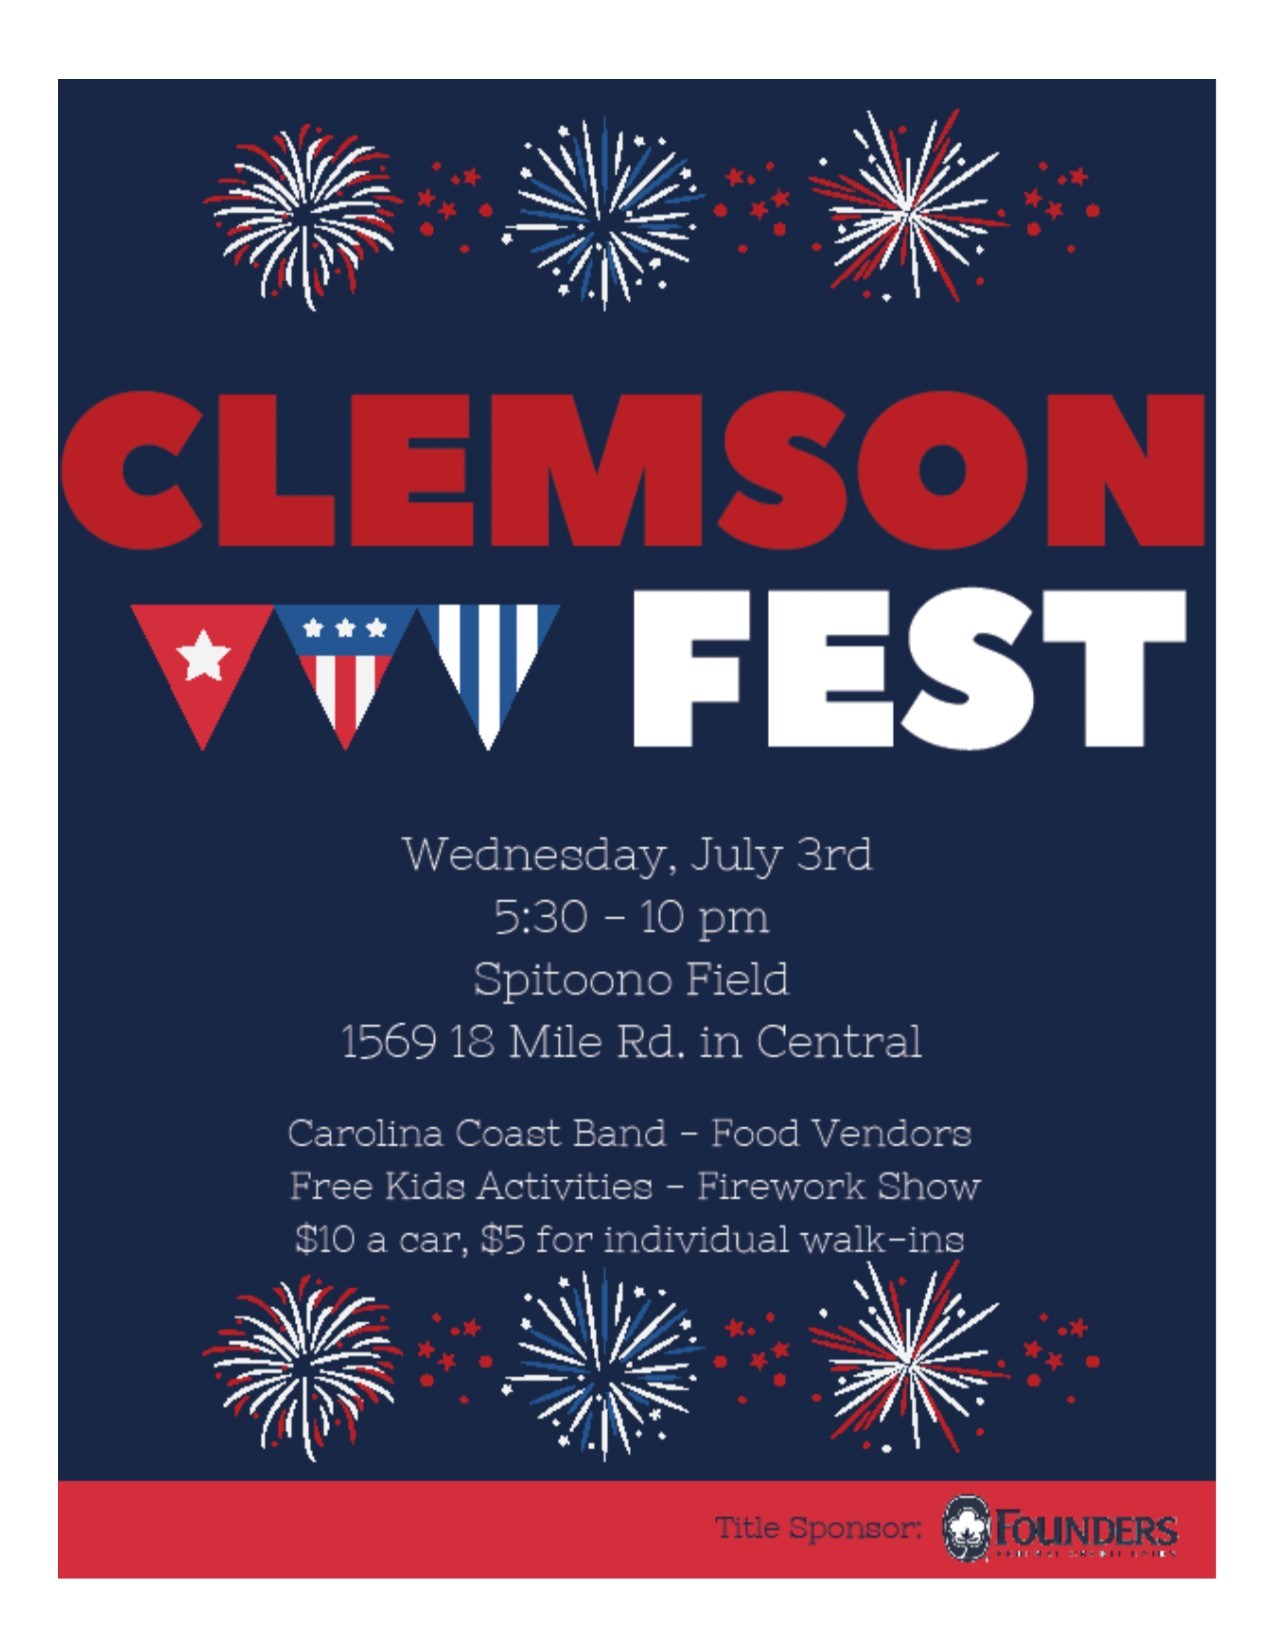 Clemson Fest 2019 Spittoono Field July 3rd, 2019 5:30pm to 10pm